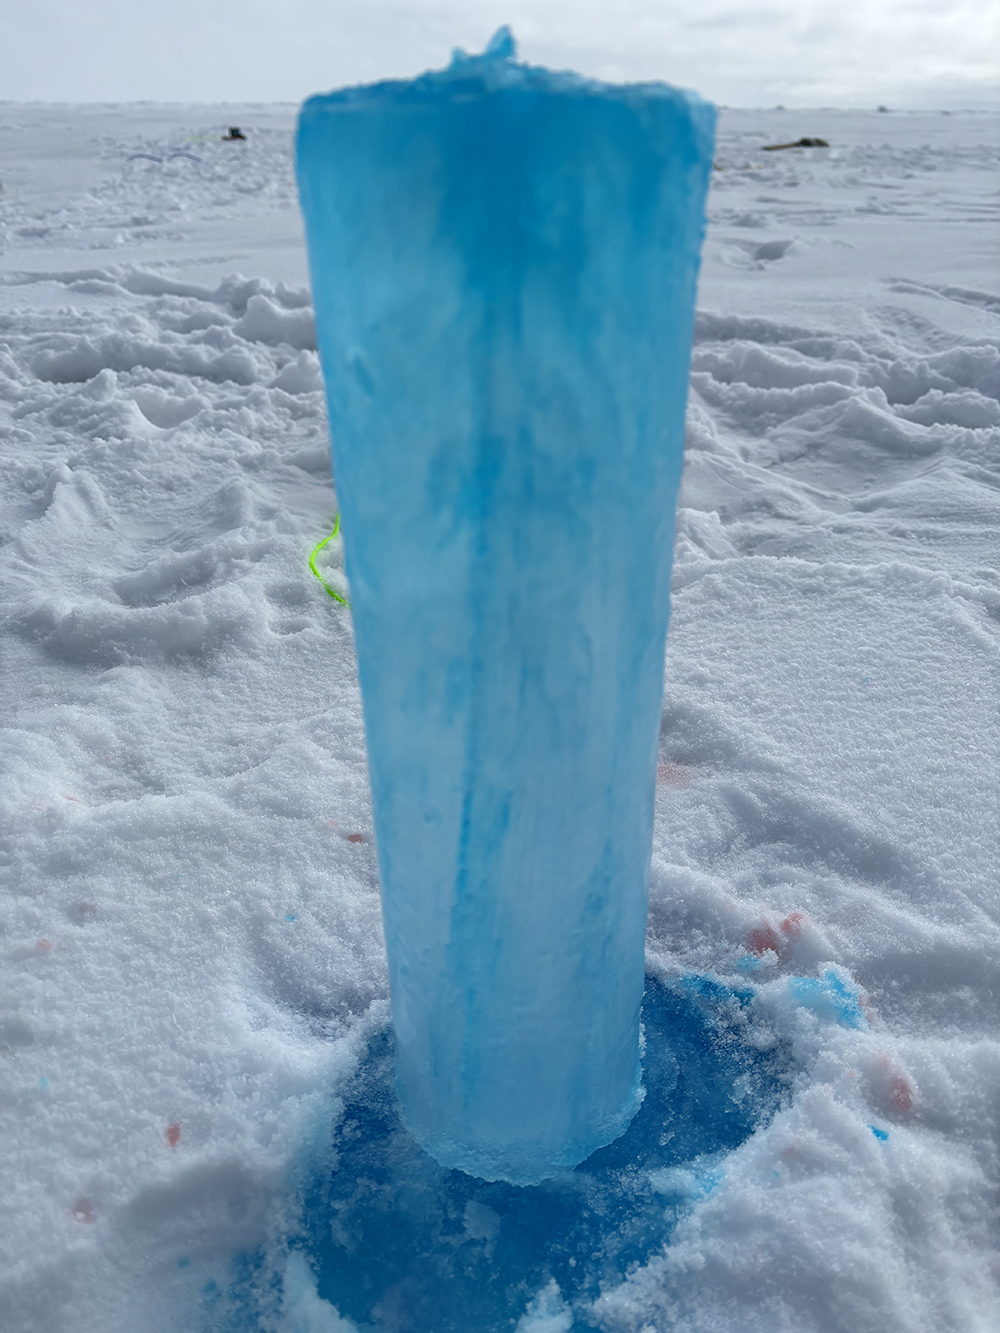 &lt;strong&gt;Figure 1.&lt;/strong&gt; Blue dye on an ice core illuminates the presence of brine inclusions, which are marked by the darker streaks. Photo courtesy of Anthony Jajeh.